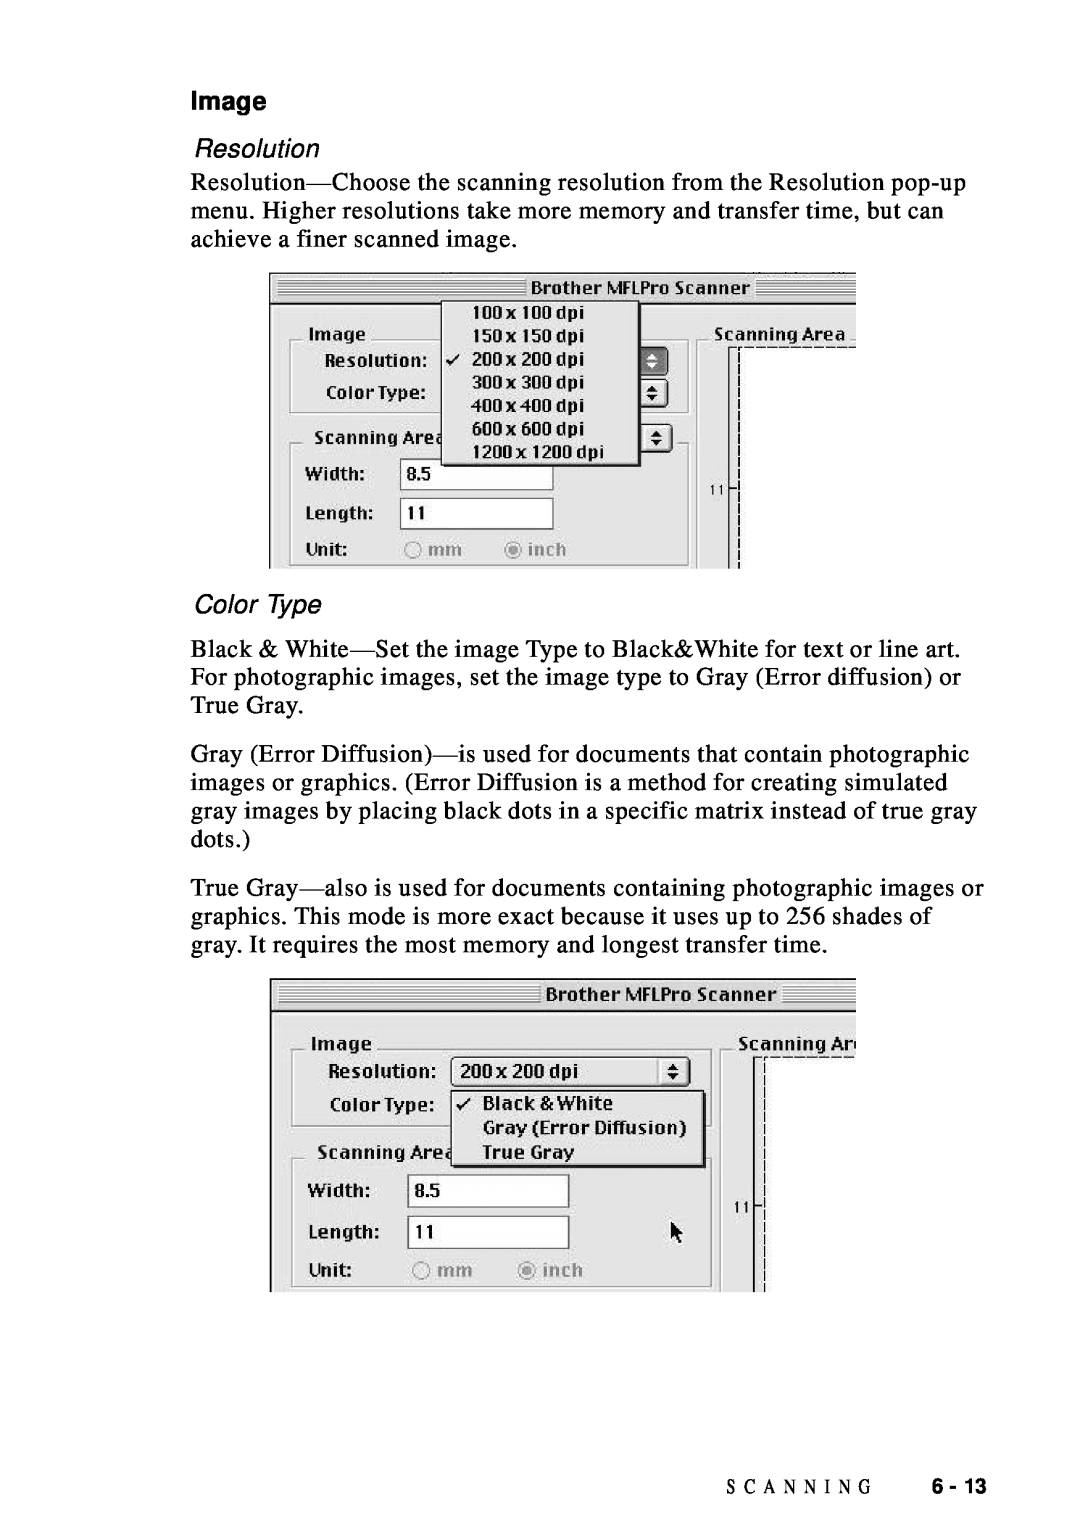 Brother DCP1200 manual Image, Resolution, Color Type 